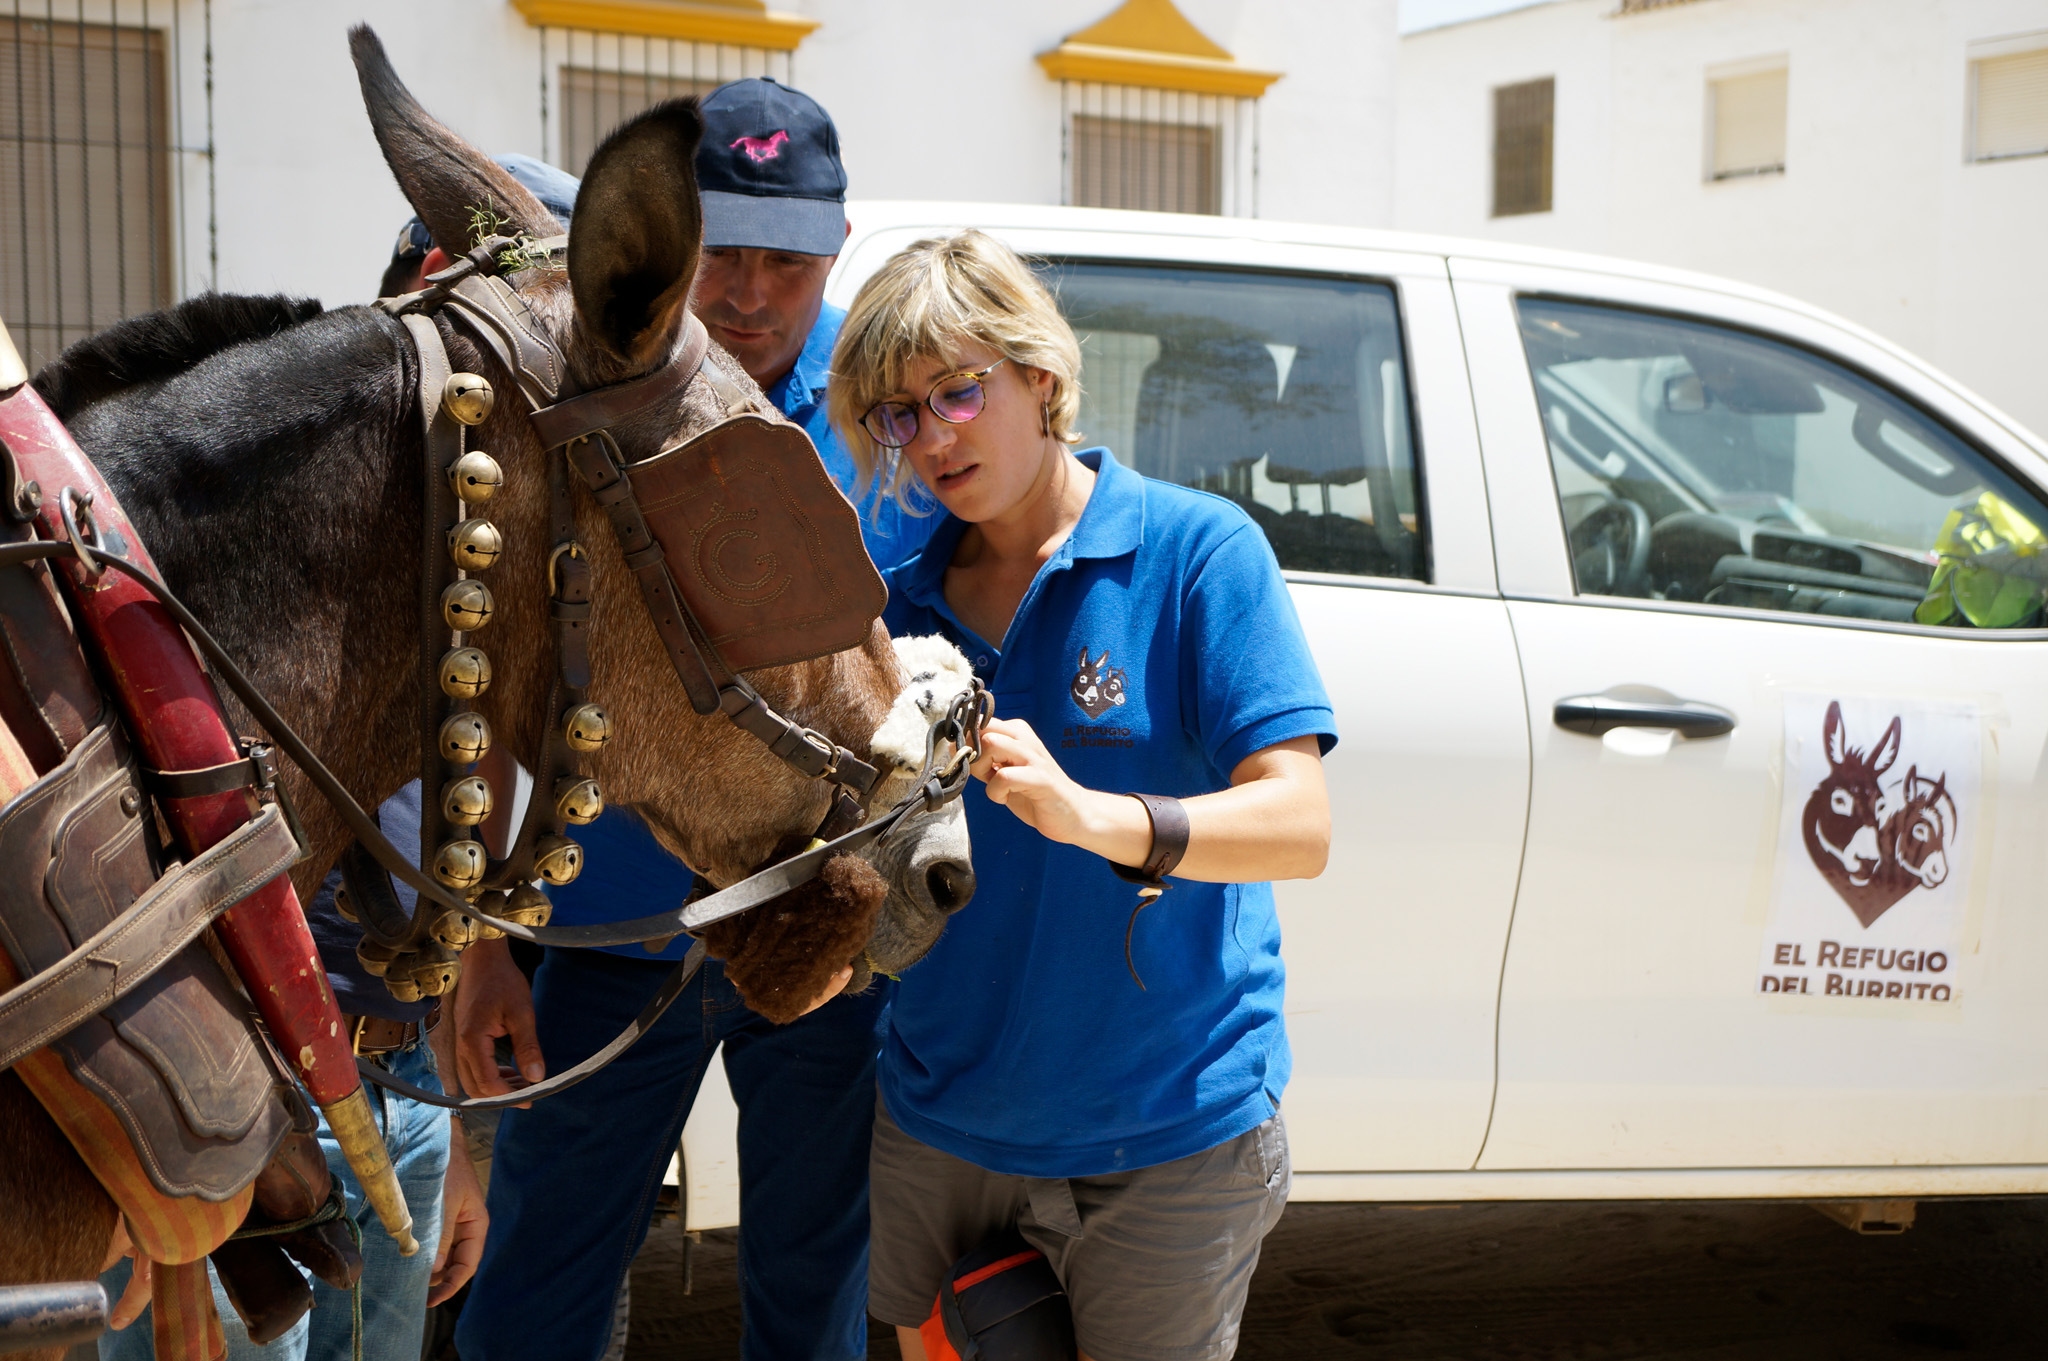 Coral Ruiz advising Rociero on protecting his mule´s nose injury caused by serrated noseband